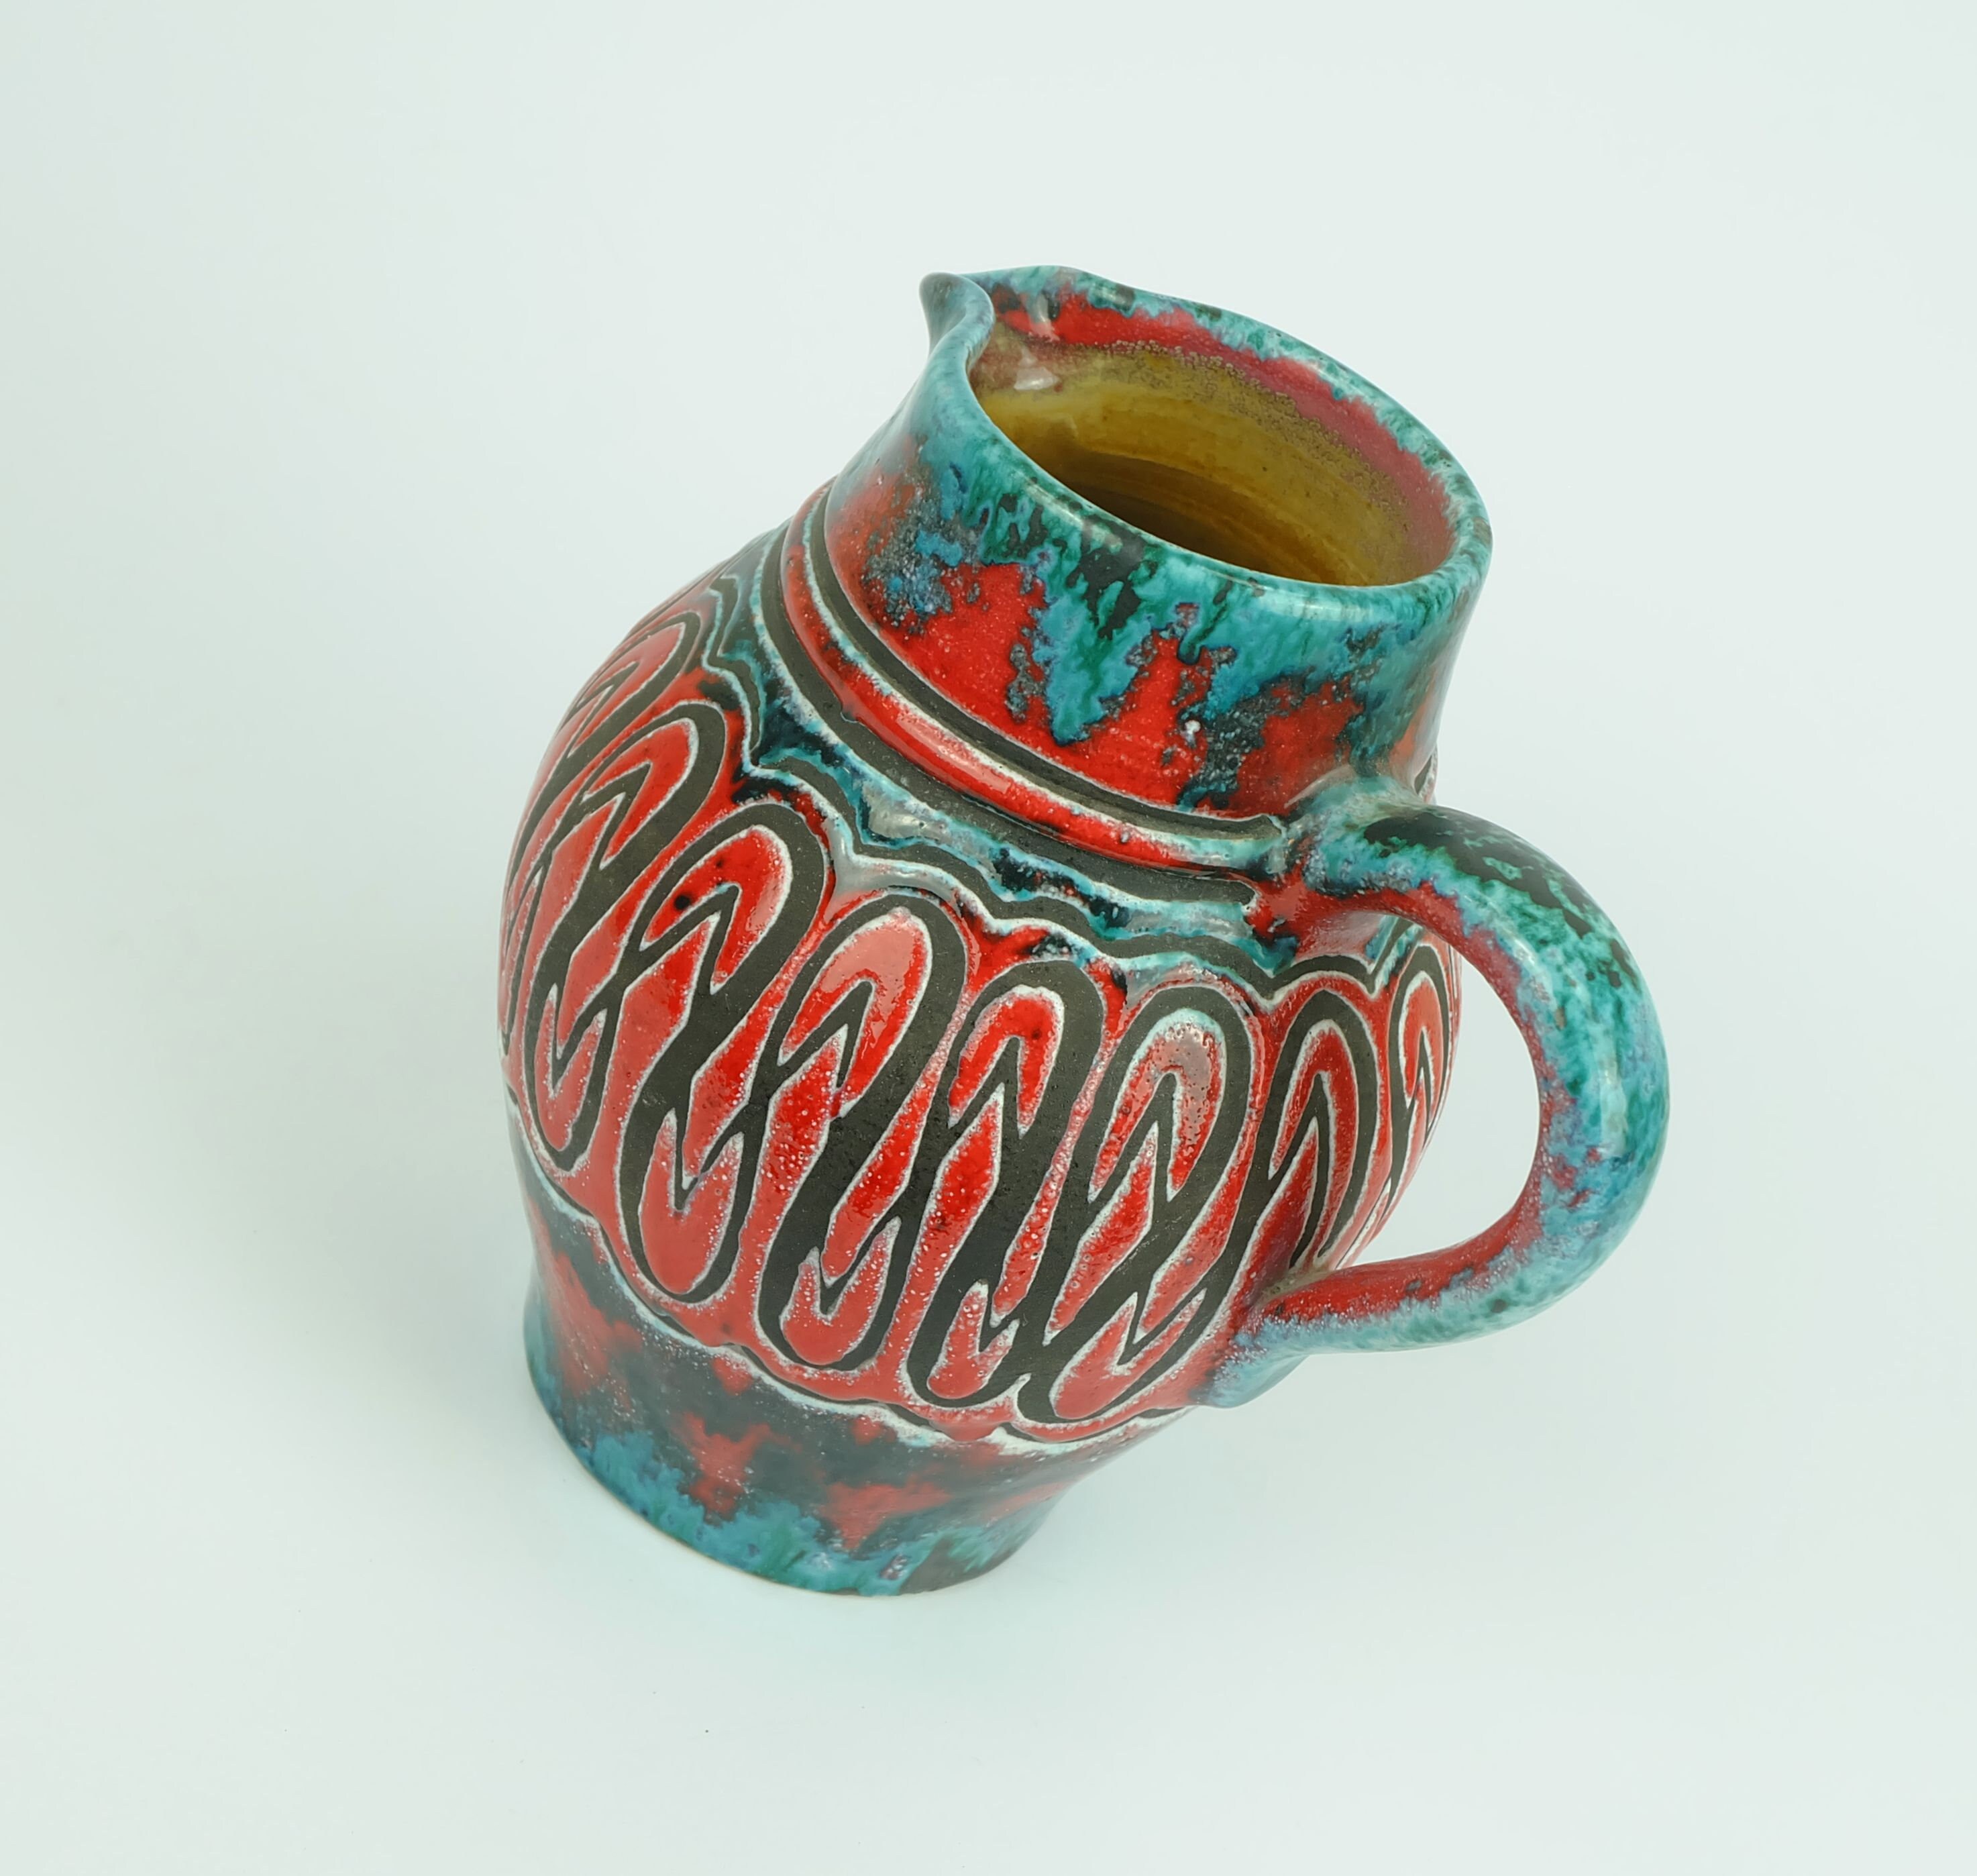 1960s 70s handmade ceramic VASE jug red and turquoise glaze relief pattern